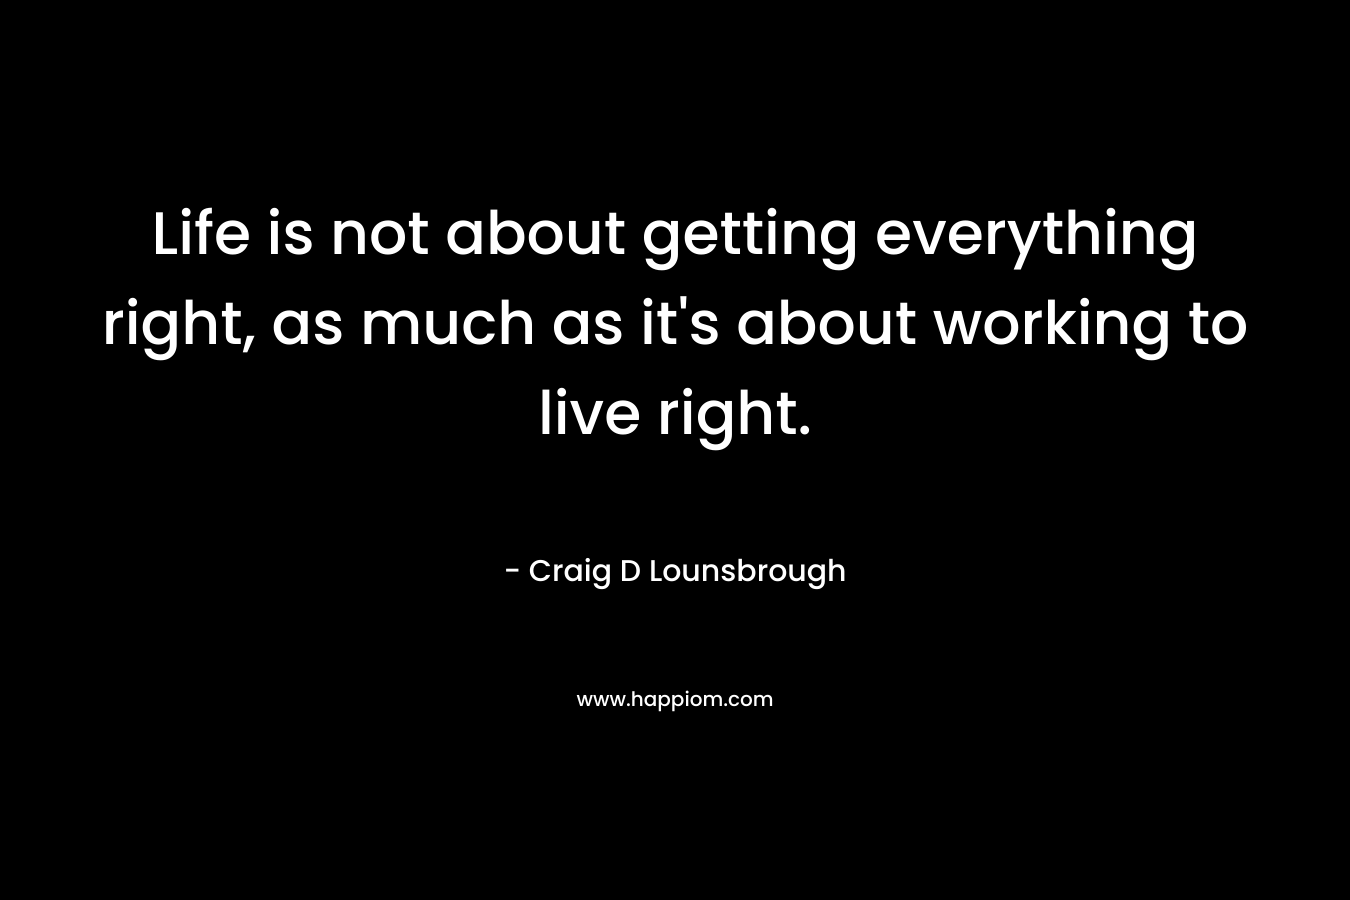 Life is not about getting everything right, as much as it's about working to live right.